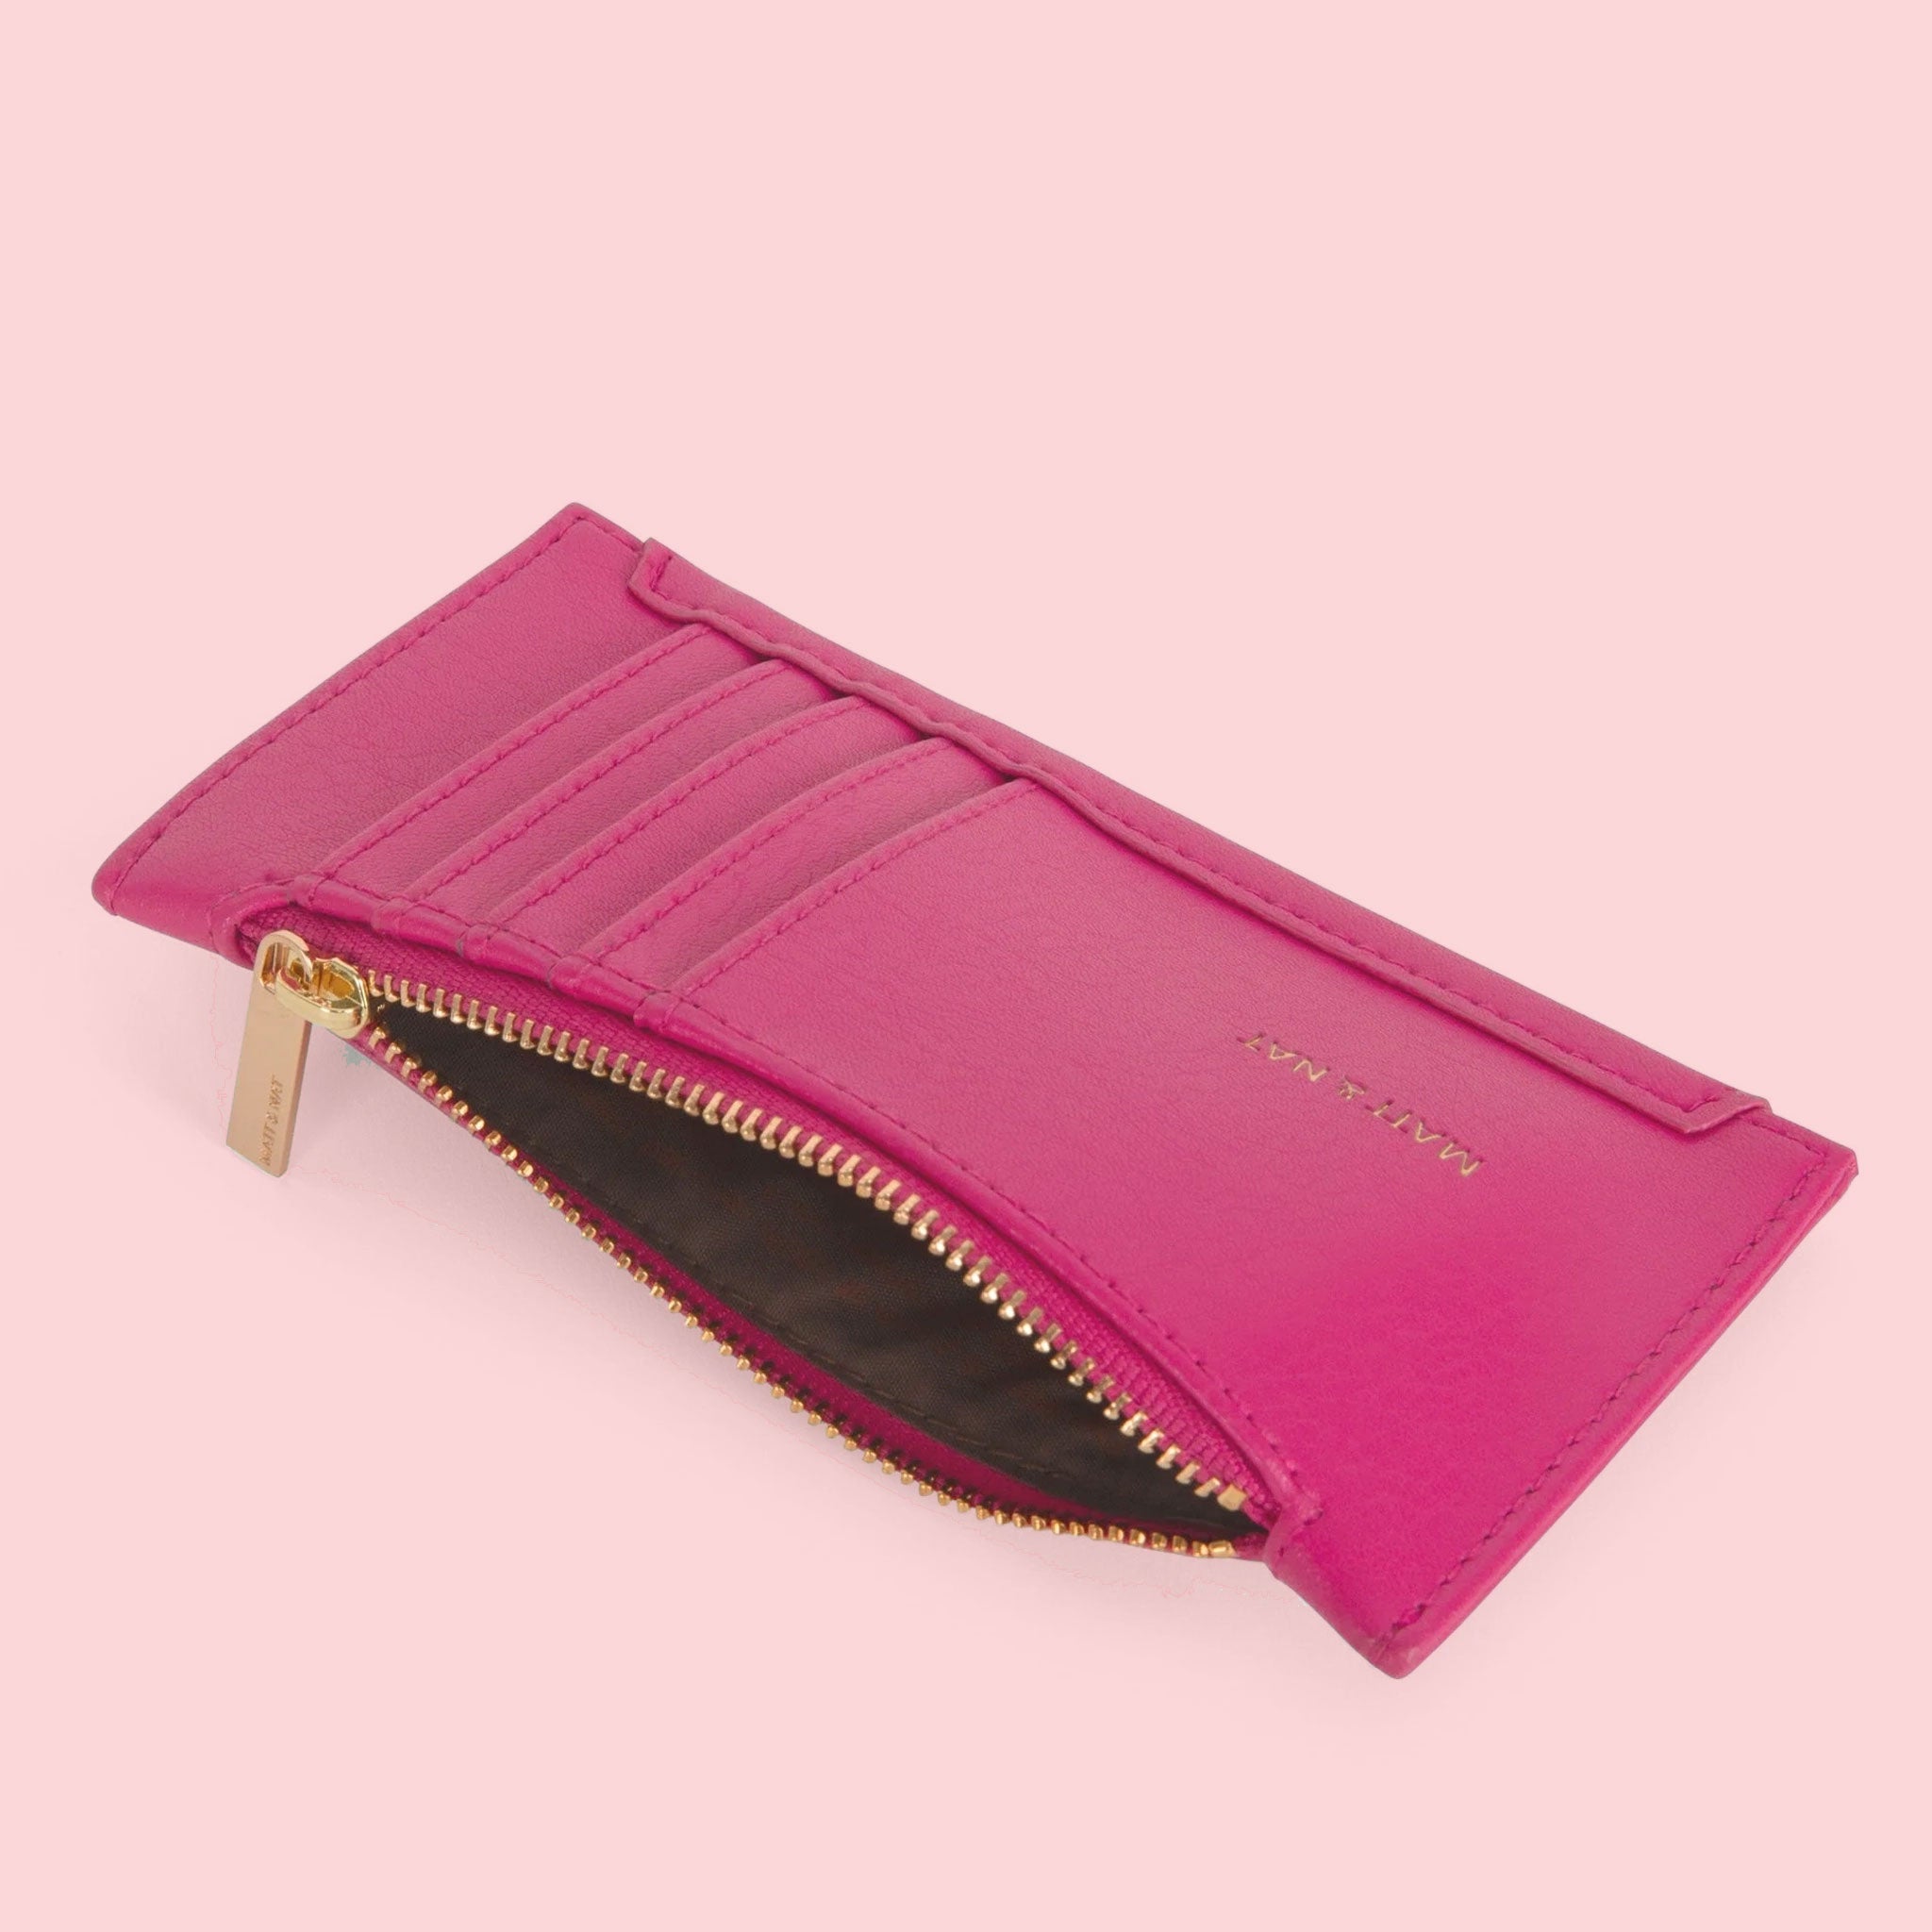 On a pink background is a hot pink wallet with card slots on the outside and a zipper.